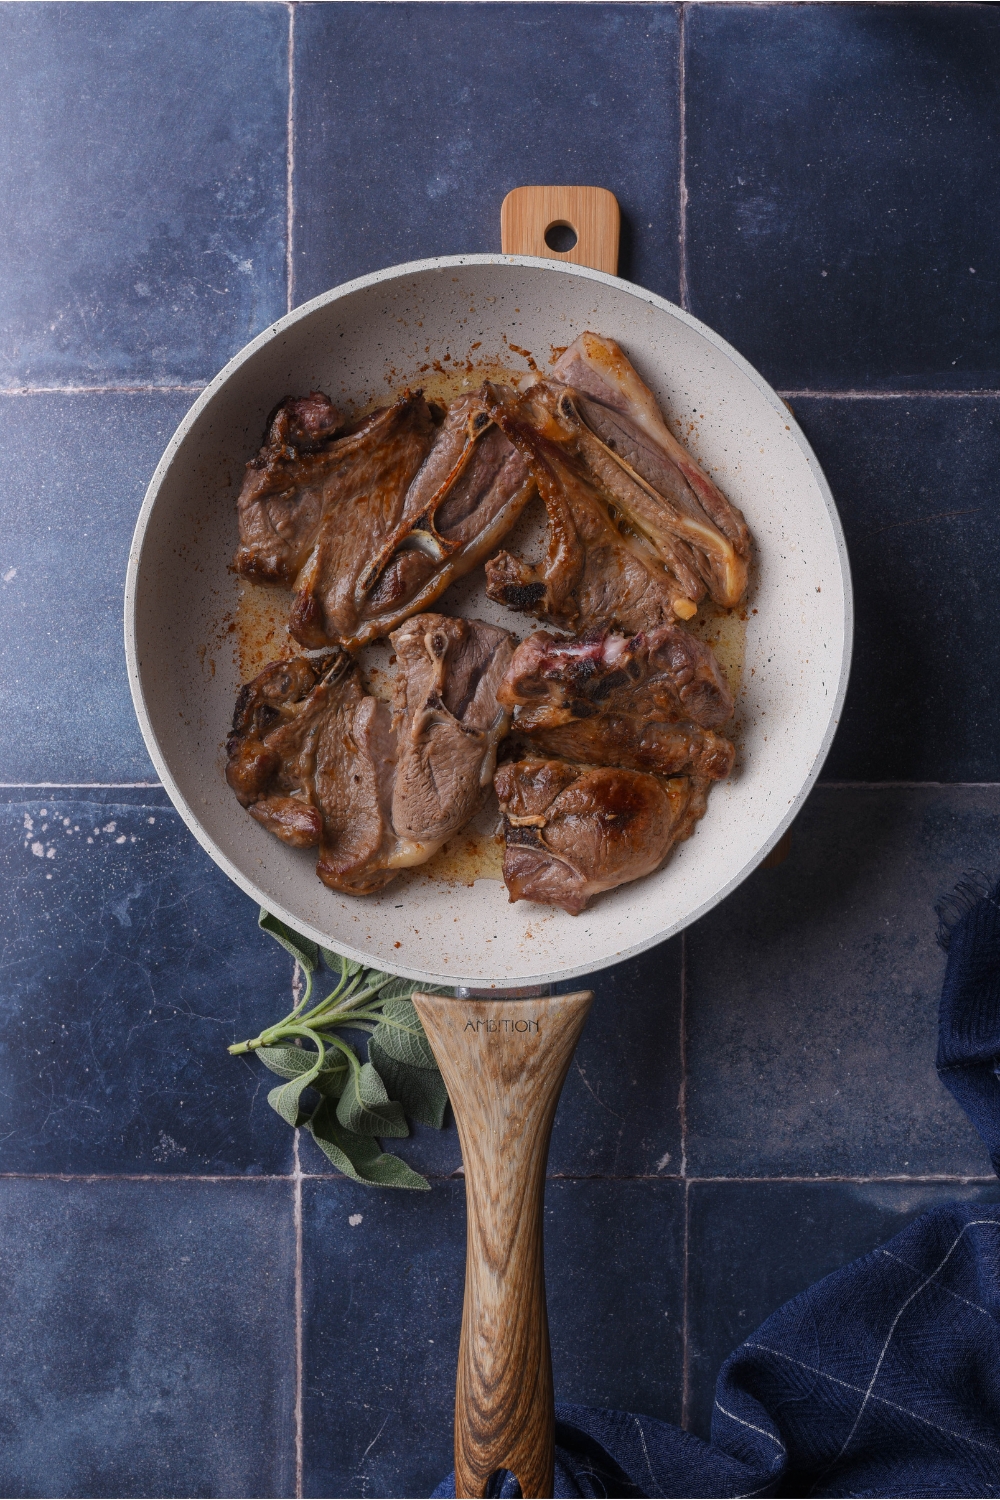 Grey skillet with a wooden handle. The skillet is filled with cooked lamb chops.